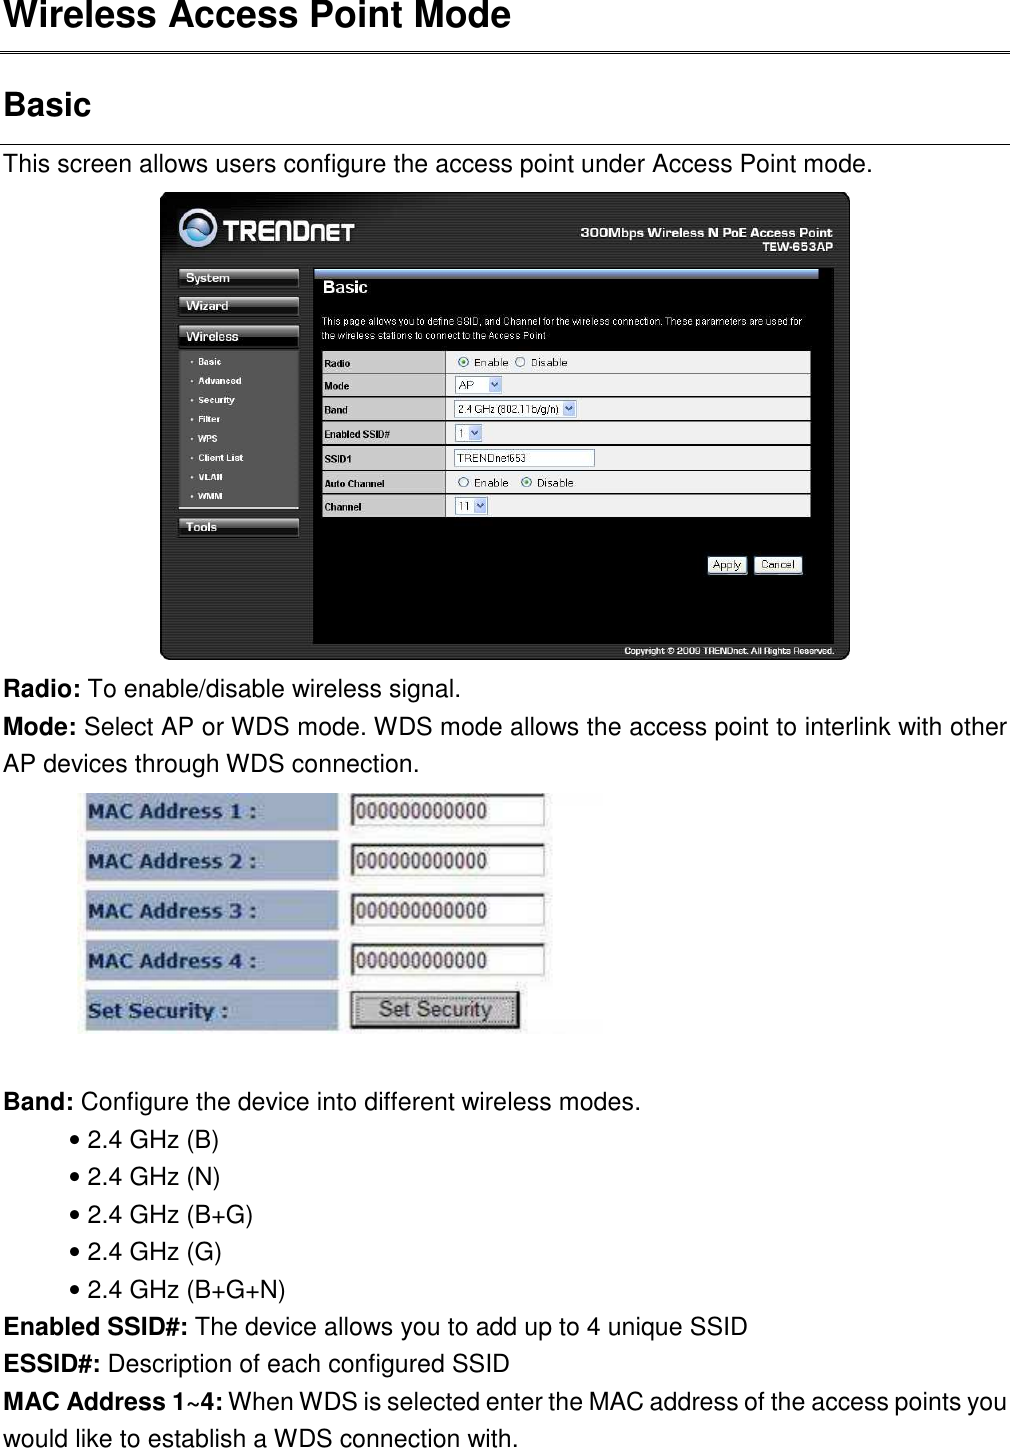 Wireless Access Point Mode Basic This screen allows users configure the access point under Access Point mode.    Radio: To enable/disable wireless signal. Mode: Select AP or WDS mode. WDS mode allows the access point to interlink with other AP devices through WDS connection.     Band: Configure the device into different wireless modes.   • 2.4 GHz (B) • 2.4 GHz (N) • 2.4 GHz (B+G) • 2.4 GHz (G) • 2.4 GHz (B+G+N) Enabled SSID#: The device allows you to add up to 4 unique SSID ESSID#: Description of each configured SSID MAC Address 1~4: When WDS is selected enter the MAC address of the access points you would like to establish a WDS connection with.    